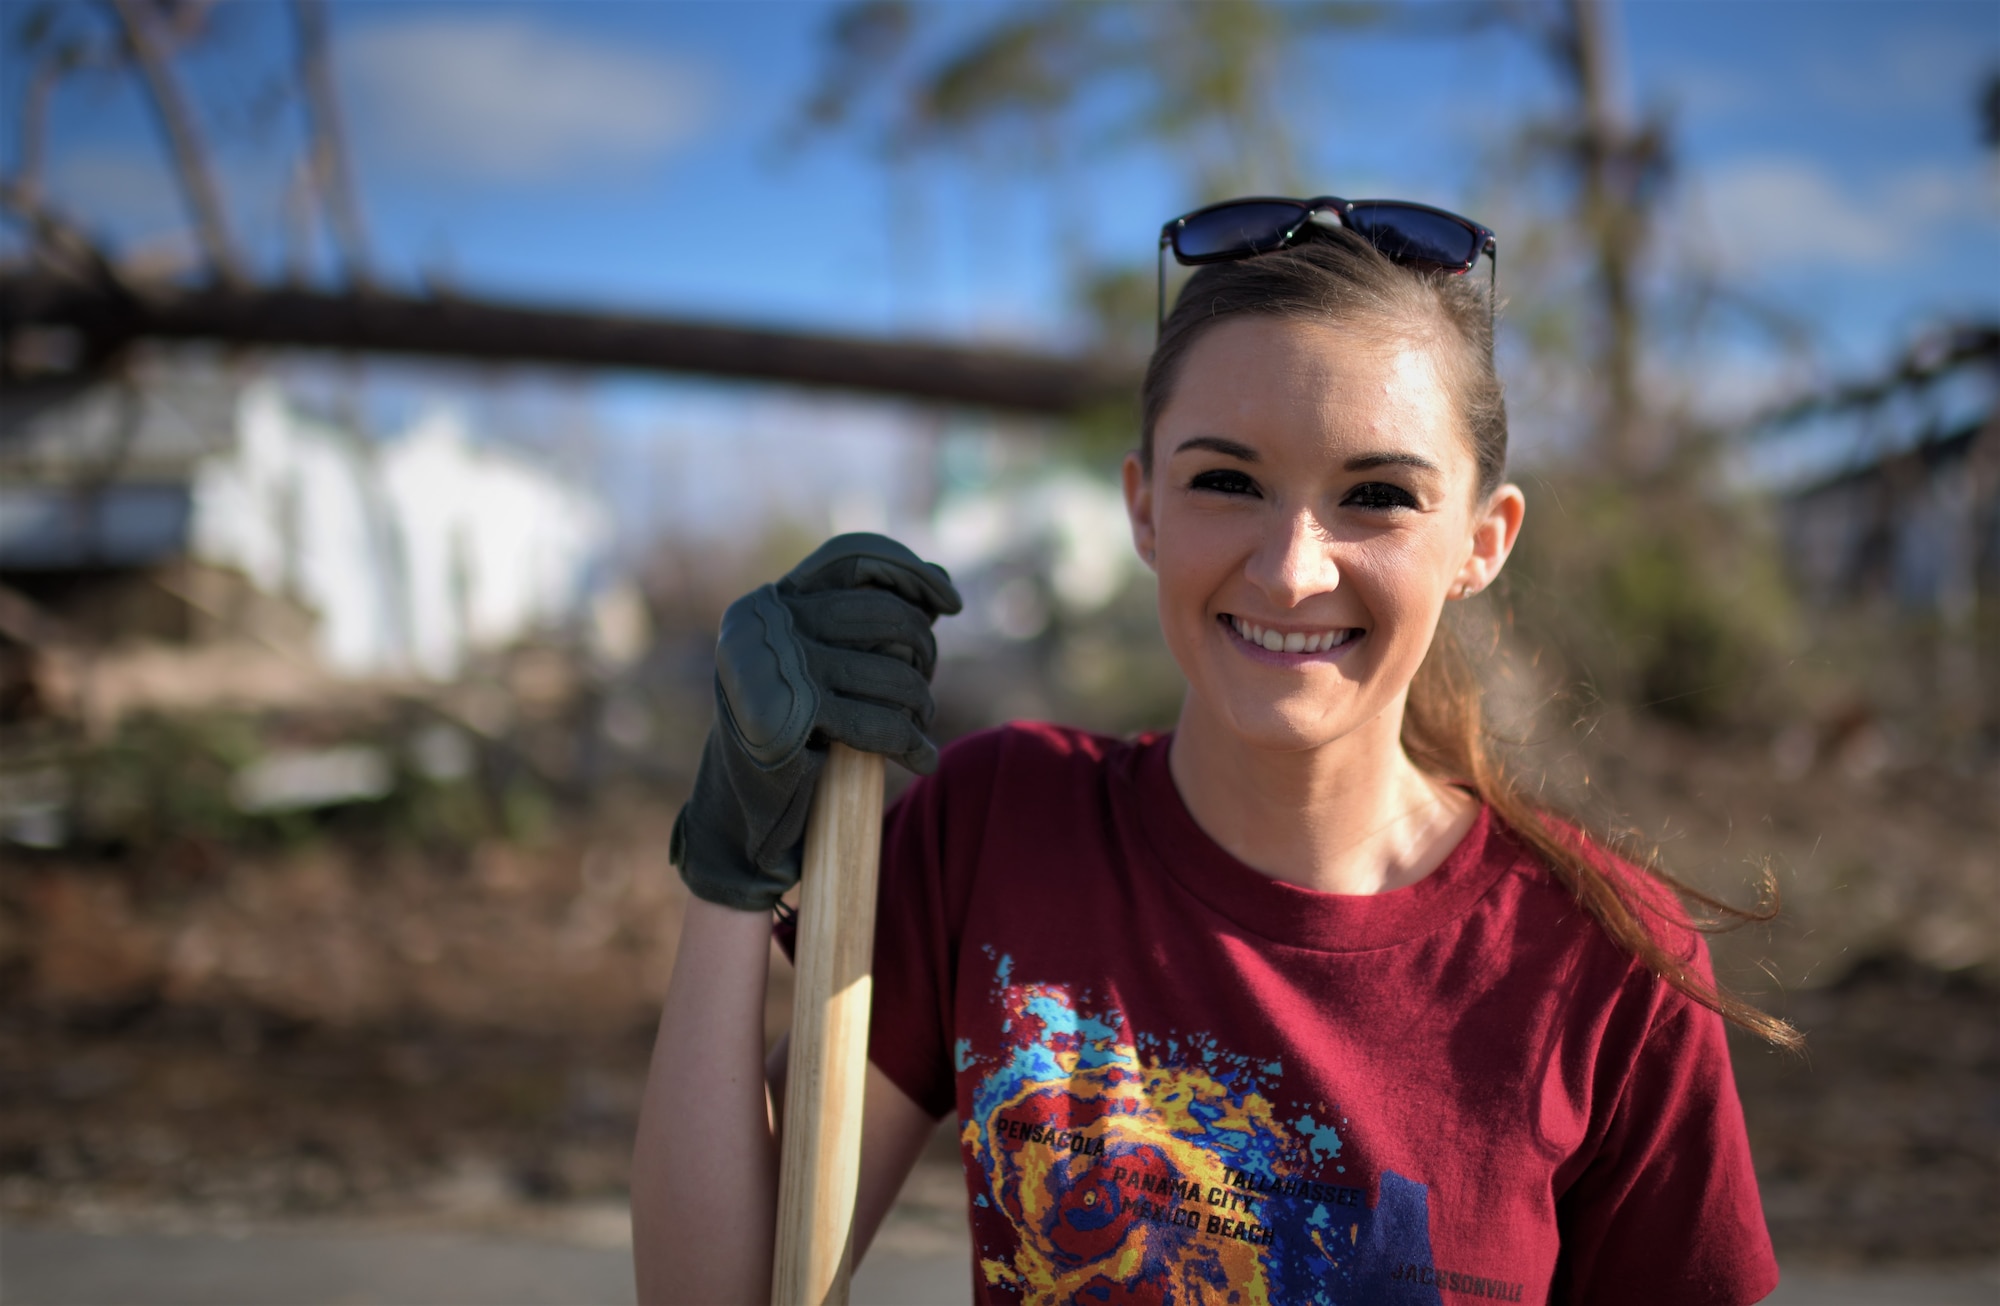 Senior Airman Megan Timbers, 325th Force Support Squadron readiness and plans and event coordinator, stands in front of a broken tree line at Under the Palms Park in Mexico Beach, Fla., Dec. 16, 2018. Timbers helped recruit volunteers from Tyndall and Eglin Air Force Bases to come together to help clean Mexico Beach, one of the communities hit the hardest by Hurricane Michael.  The volunteers were able to clean up more than 40 cubic yards of debris within four hours. (U.S. Air Force photo by Tech. Sgt. Sara Keller)